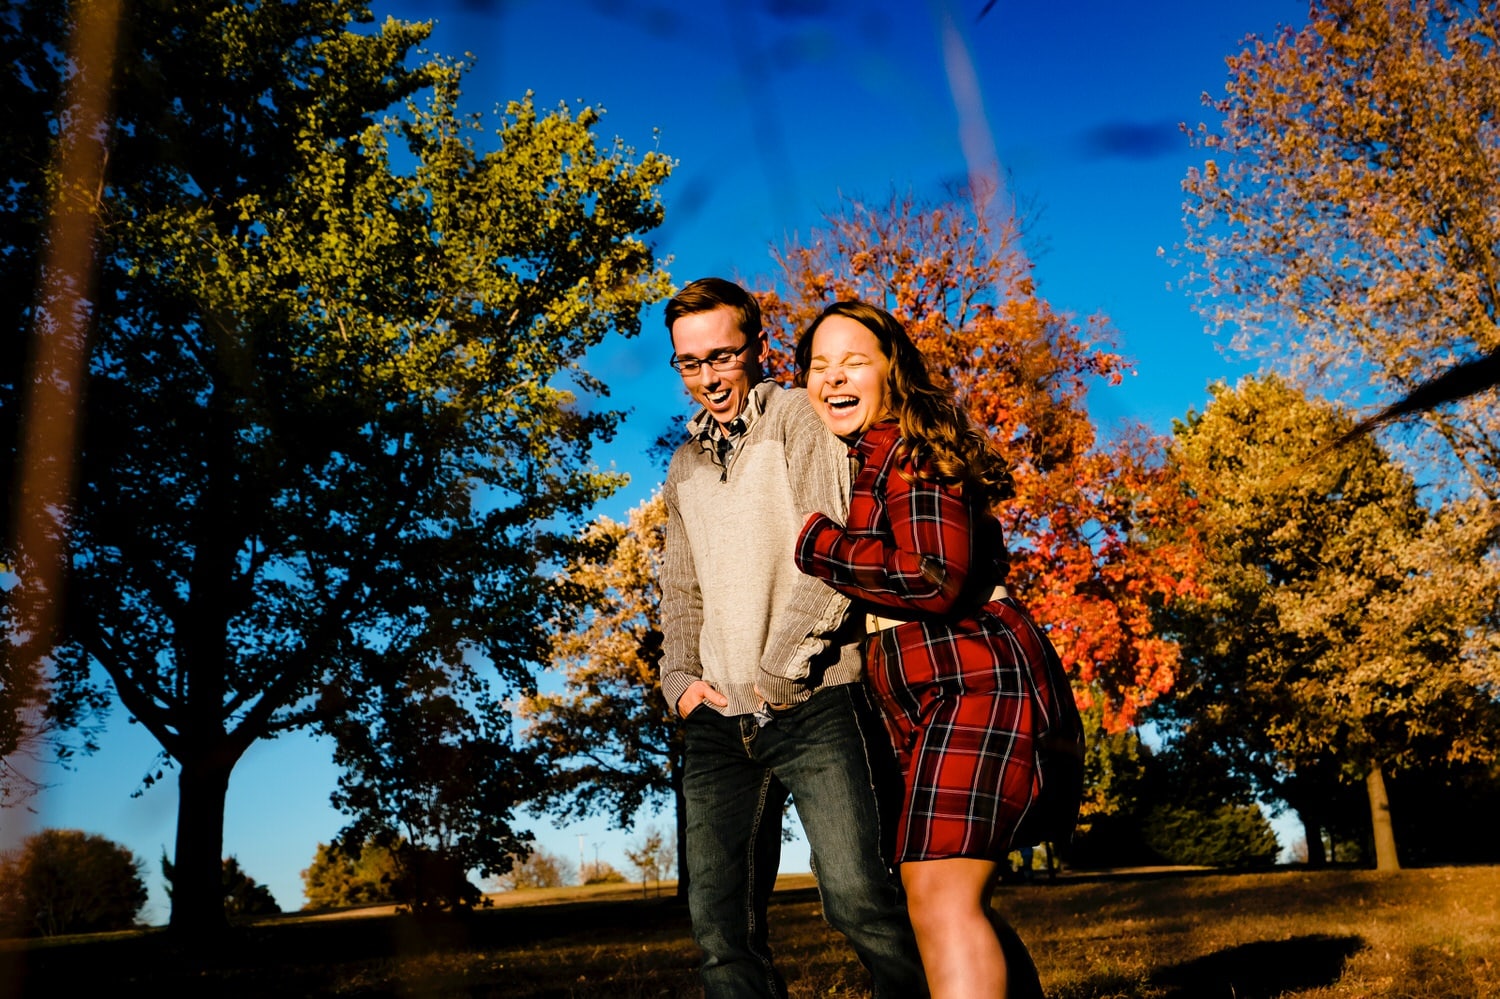 A colorful, vibrant picture of a woman in a red plaid dress tickling a man in a gray sweater against a backdrop of blue skies and colorful trees during their fall engagement session in Kansas City. 